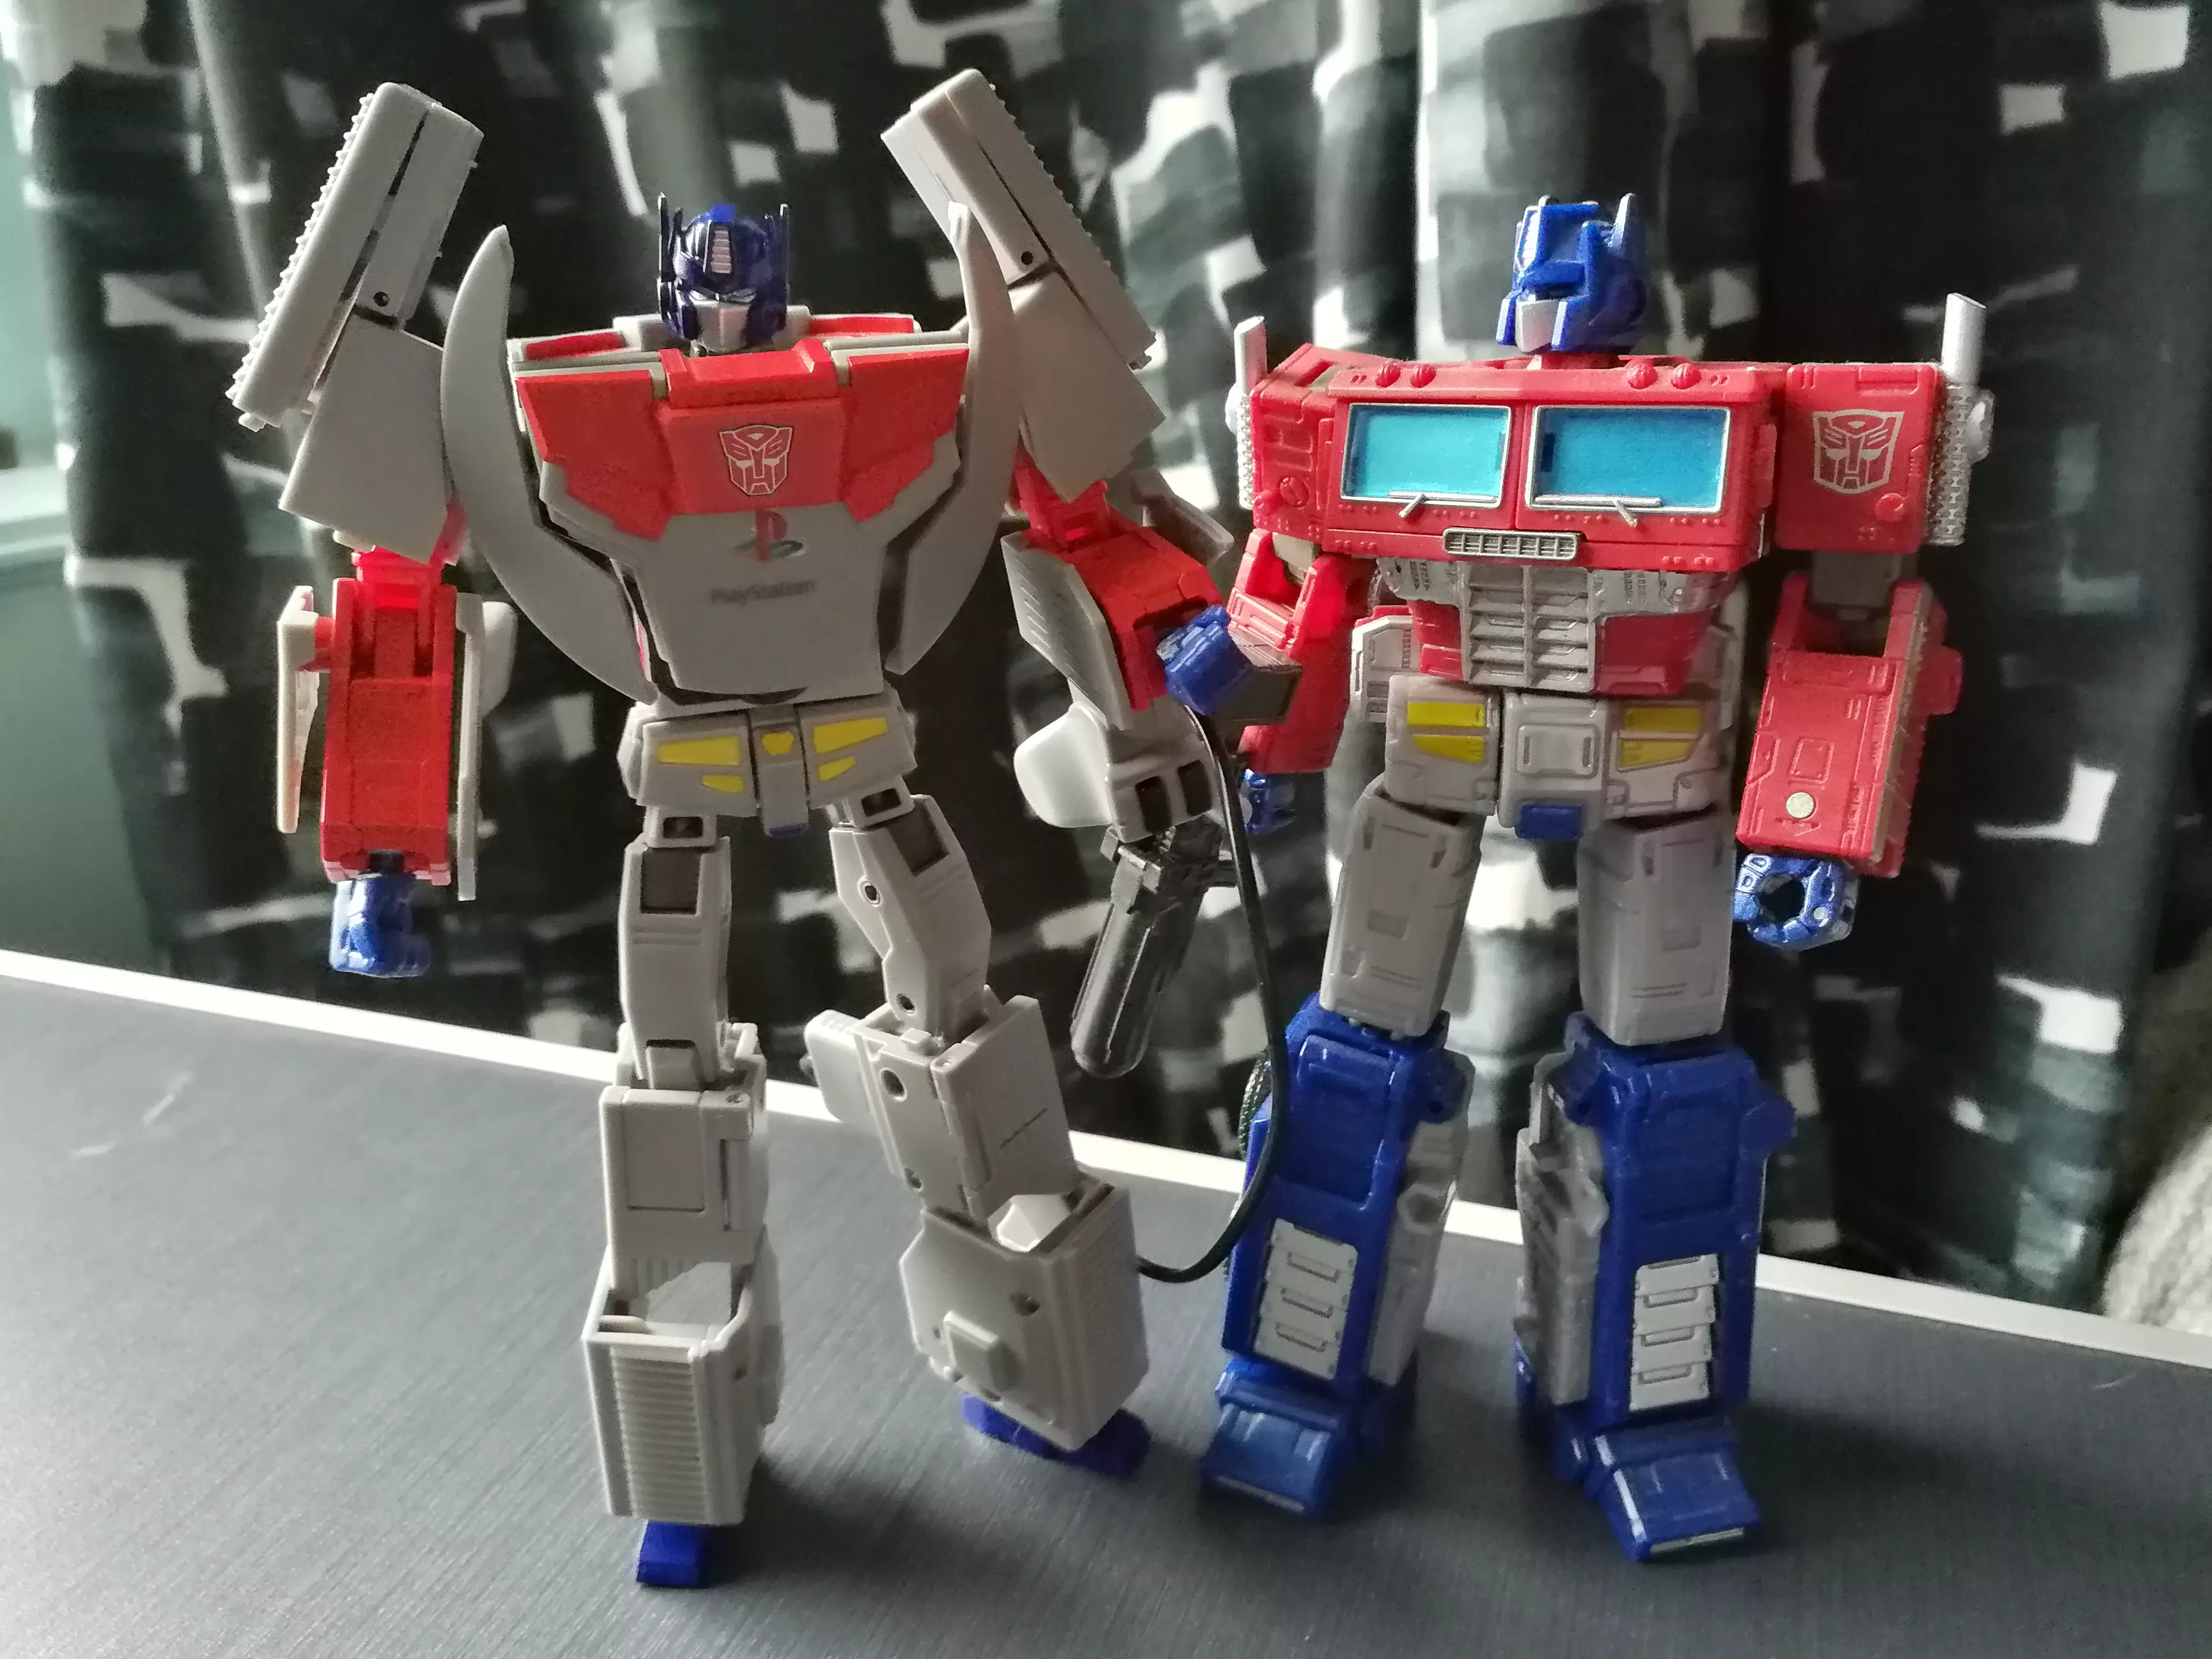 PlayStation Optimus Prime beside the Earthrise-range version of the same character